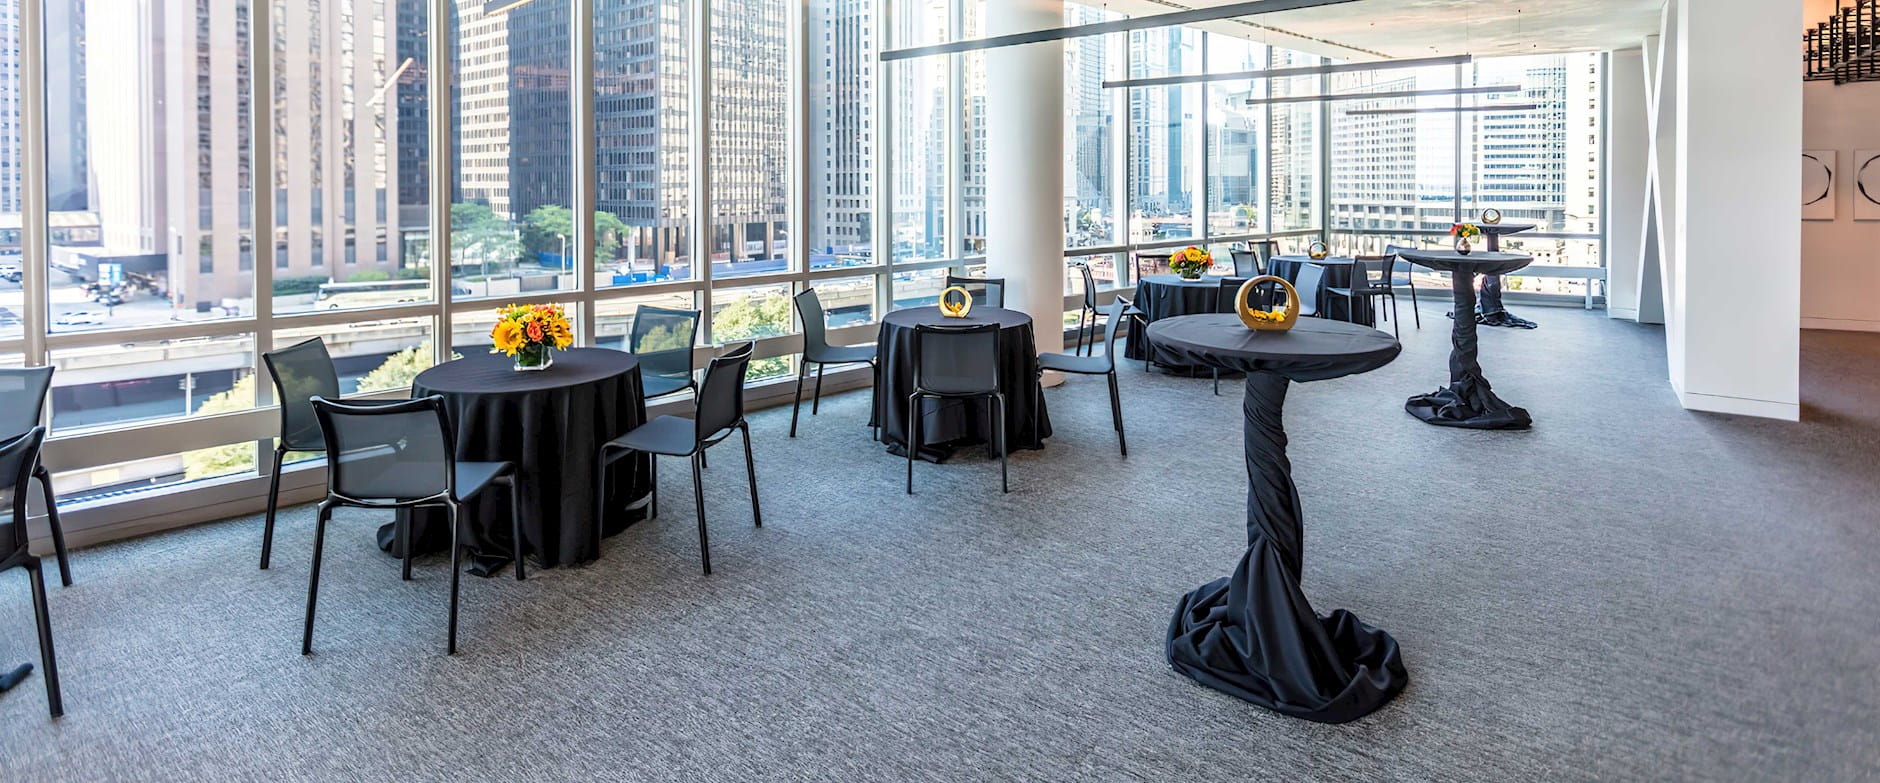 Veranda of the PIMCO Midway Club in Gleacher Center with brightly lit tables and floor to ceiling windows